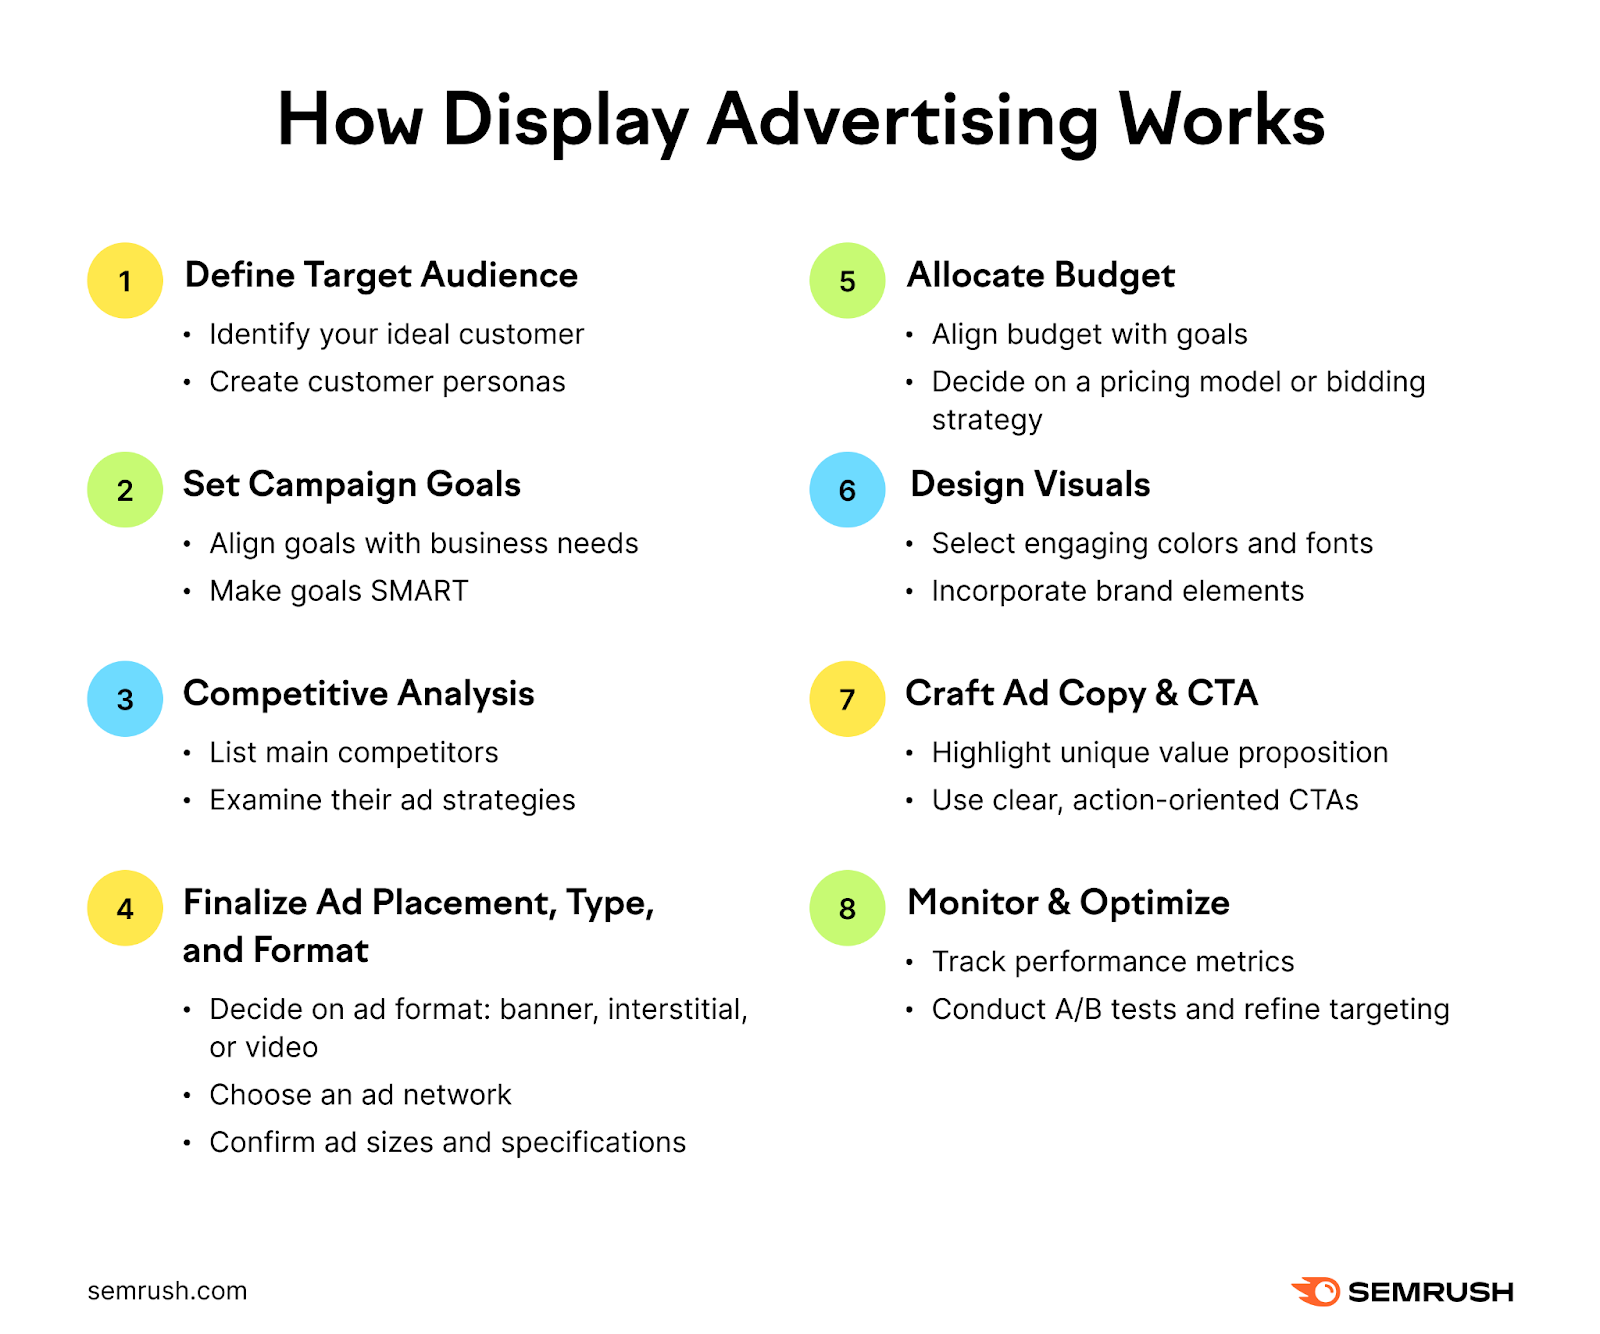 An infographic explaining how display advertising works